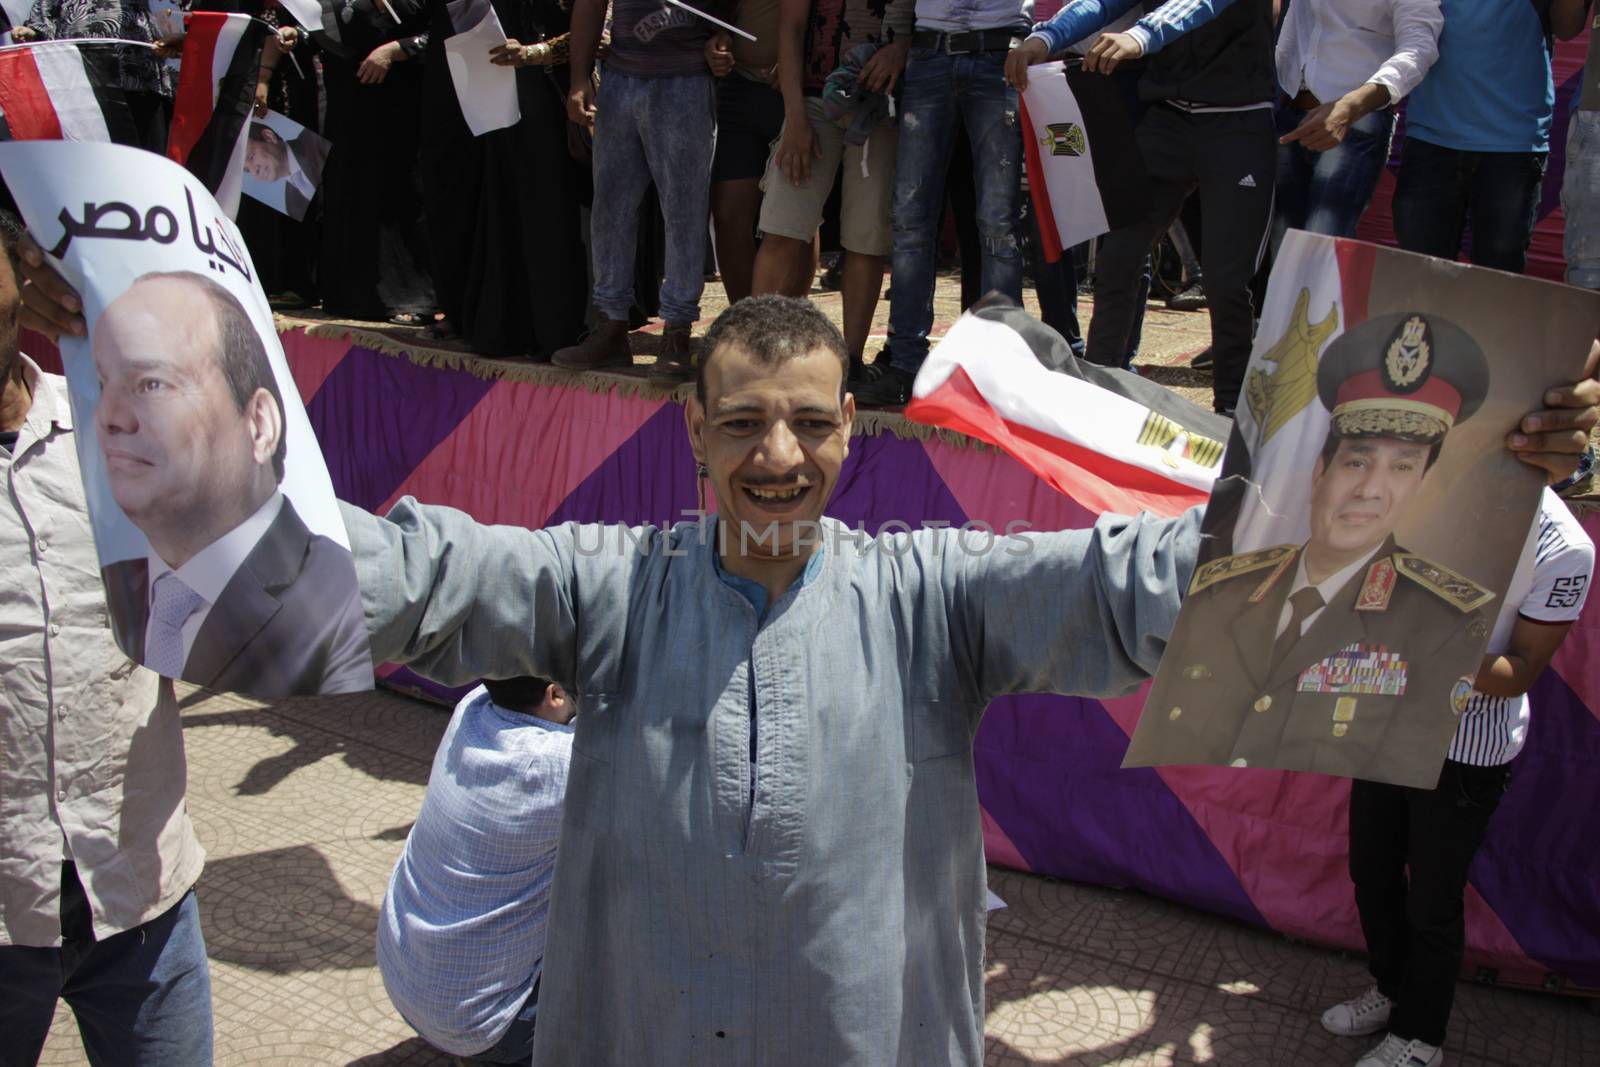 EGYPT, Giza: A man holds portraits of Egyptian president Abdel-Fattah el-Sissi reading Long live Egypt as dozens gather in Mostafa Mahmoud Square in Giza, near Cairo on April 25, 2016 to commemorate the thirty-fourth anniversary of Sinai liberation. This same day, thousands of security personnel were deployed around Cairo ahead of mass planned protests over the return of two Red Sea islands to Saudi Arabia, a decision that has provoked some of the most open criticism of President Abdel-Fattah el-Sissi's leadership.